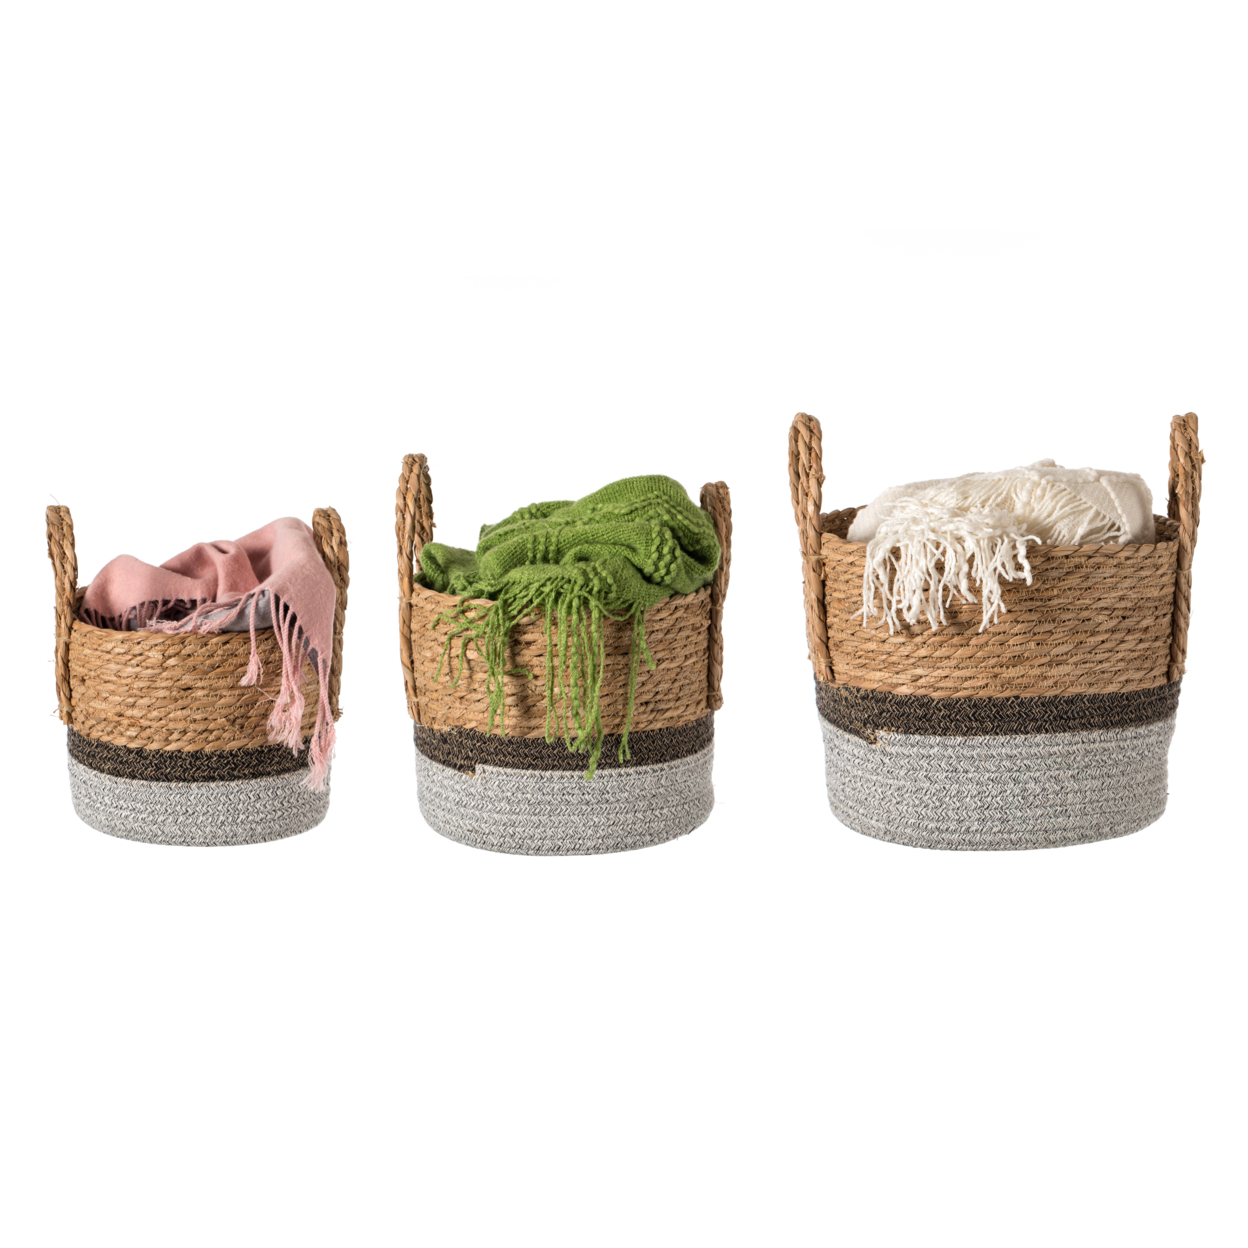 Straw Decorative Round Storage Basket Set Of 3 With Woven Handles For The Playroom, Bedroom, And Living Room